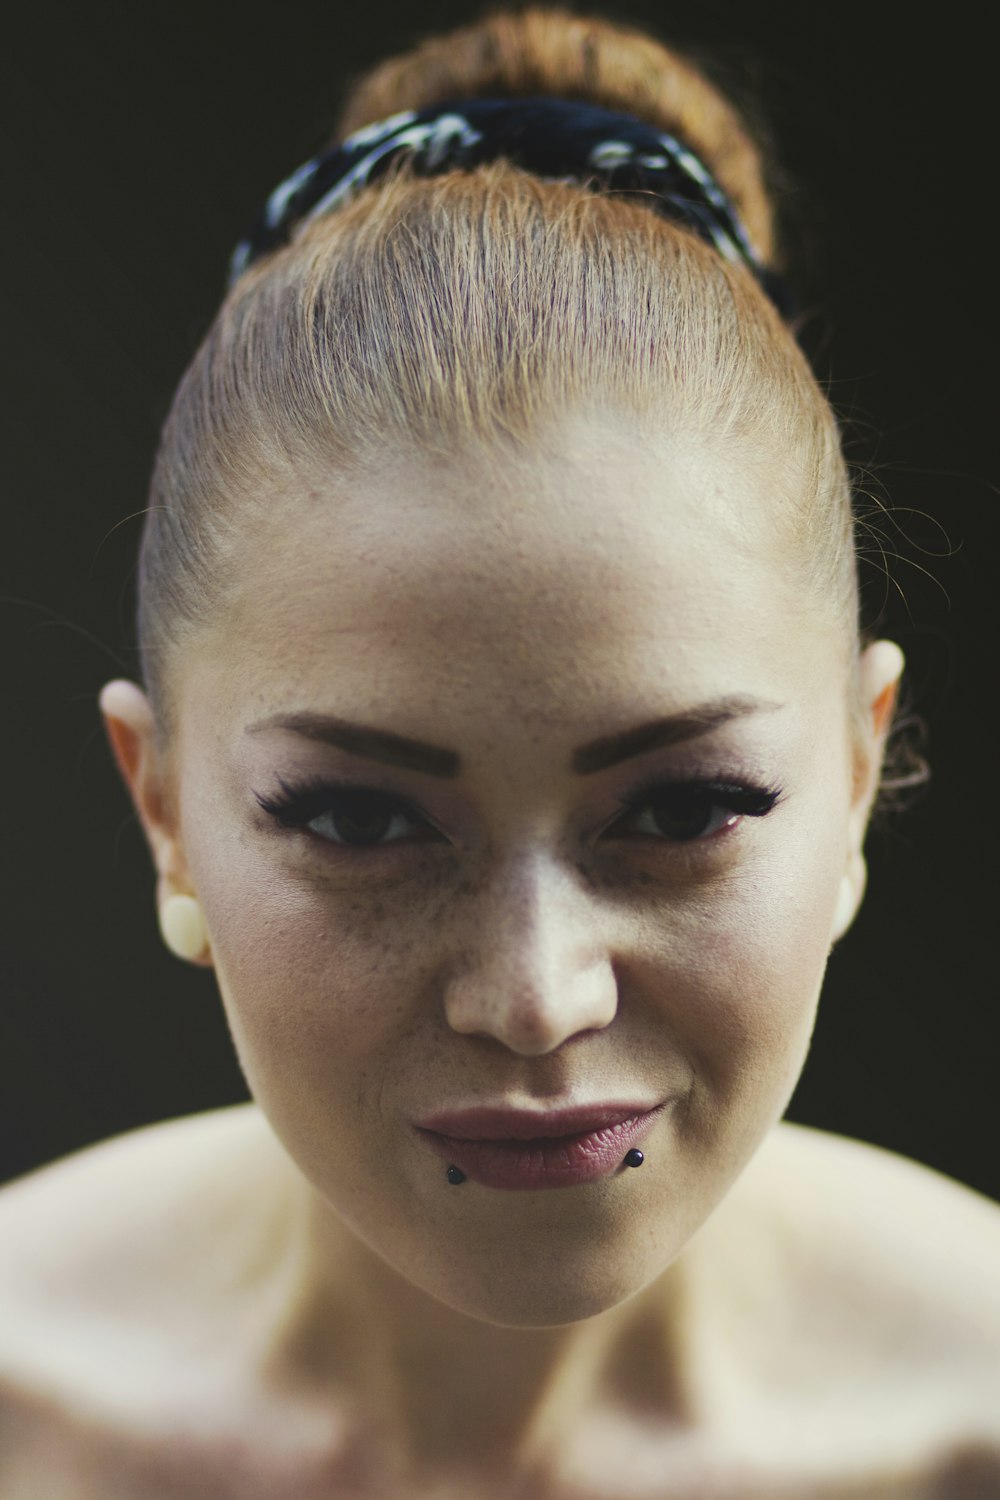 a woman with black makeup and piercings on her face